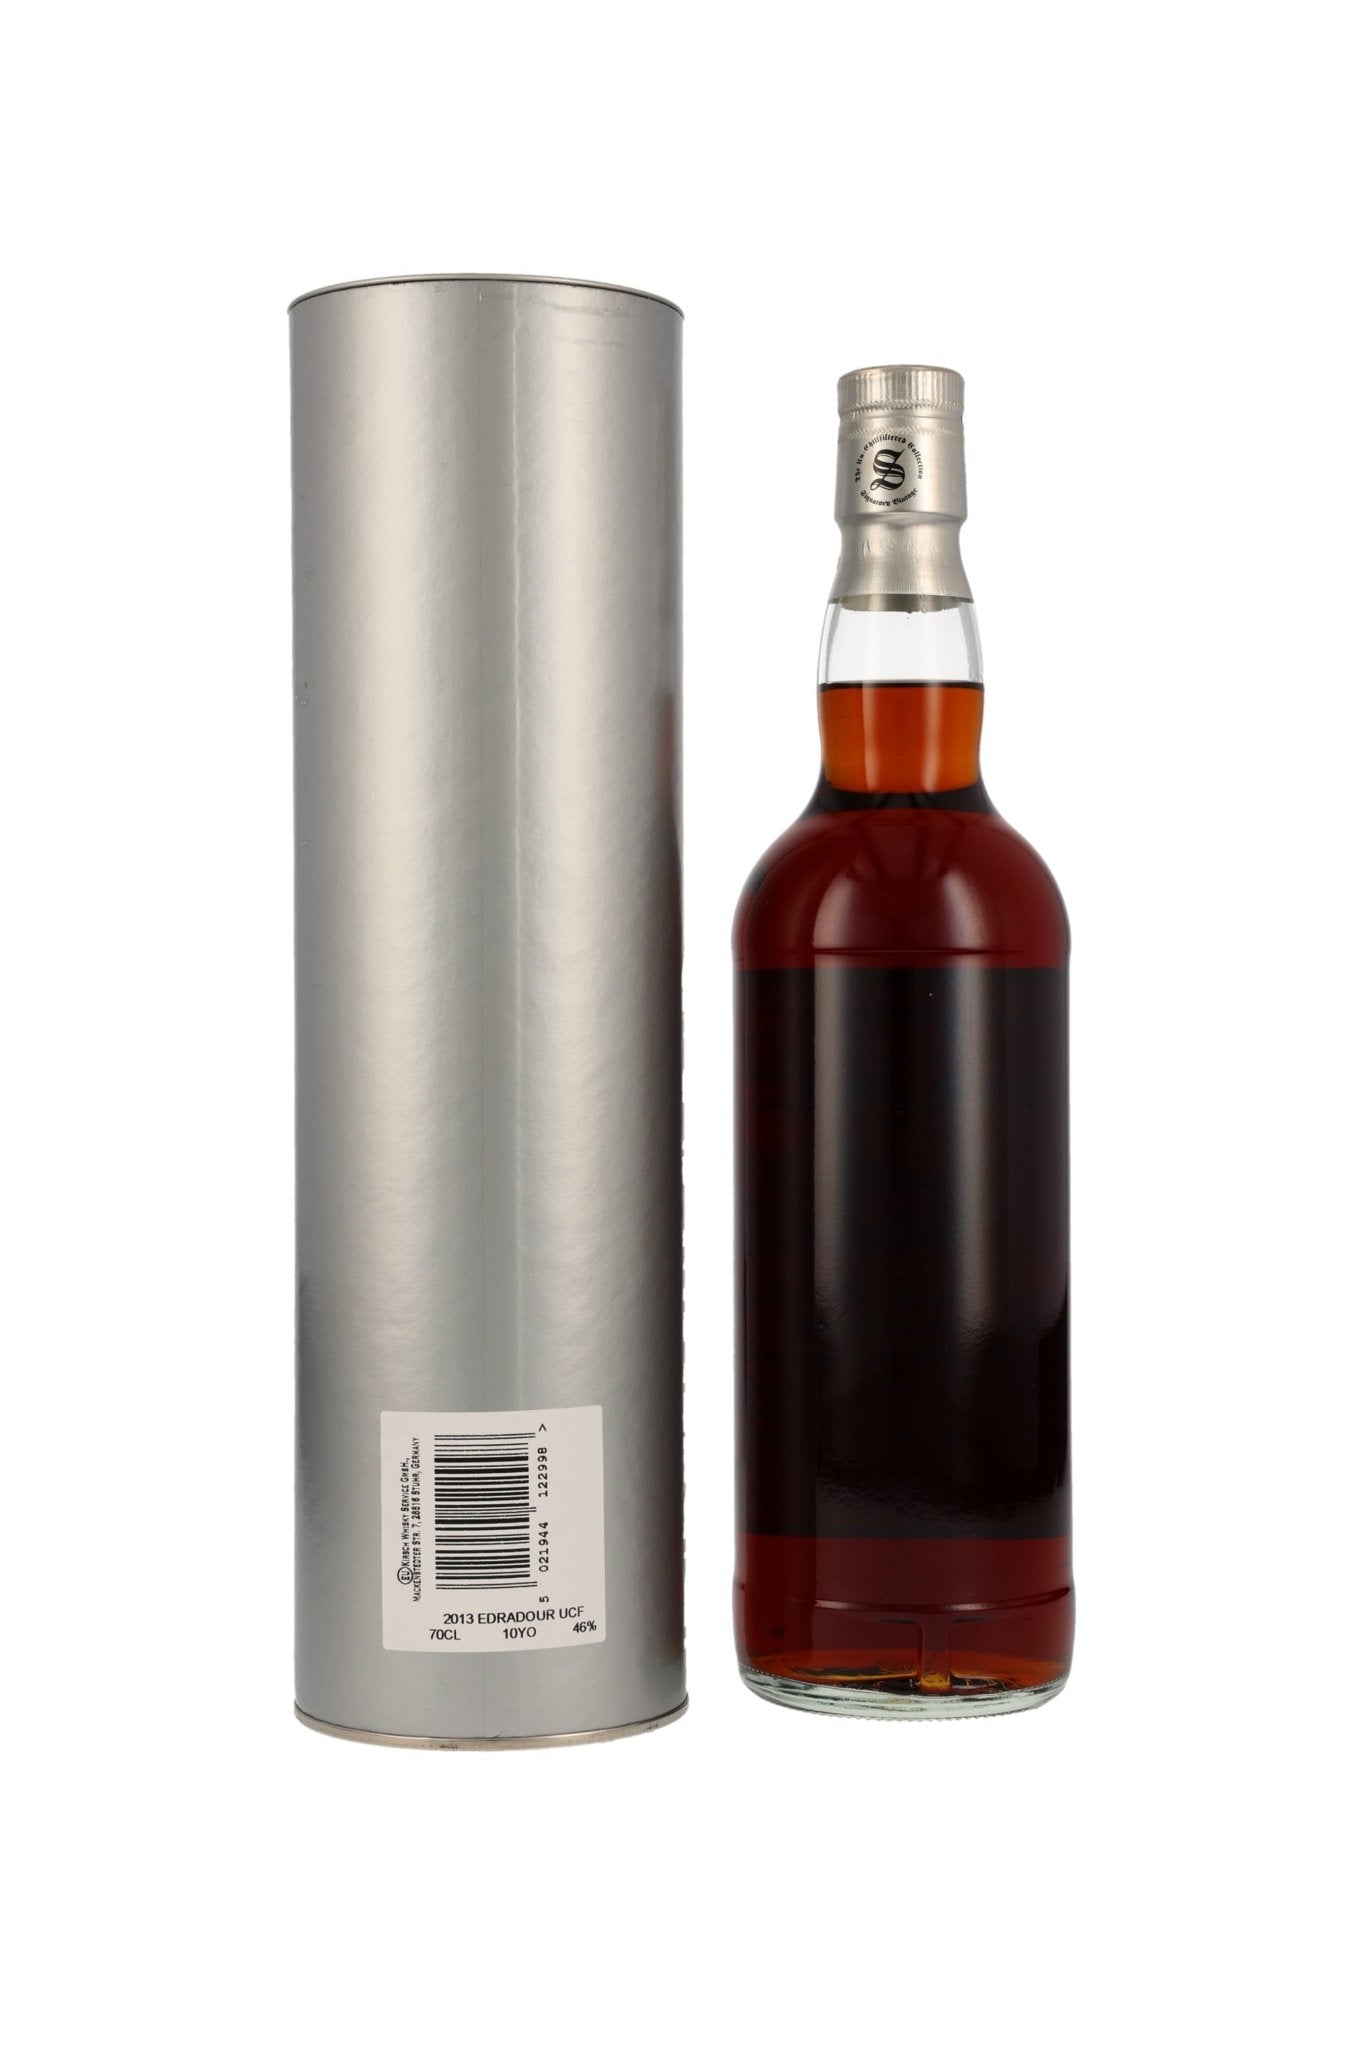 Edradour 2013/2023 SV The Un-Chillfiltered Collection Sherry Cask #281-284 46% vol. 700ml - Maltimore